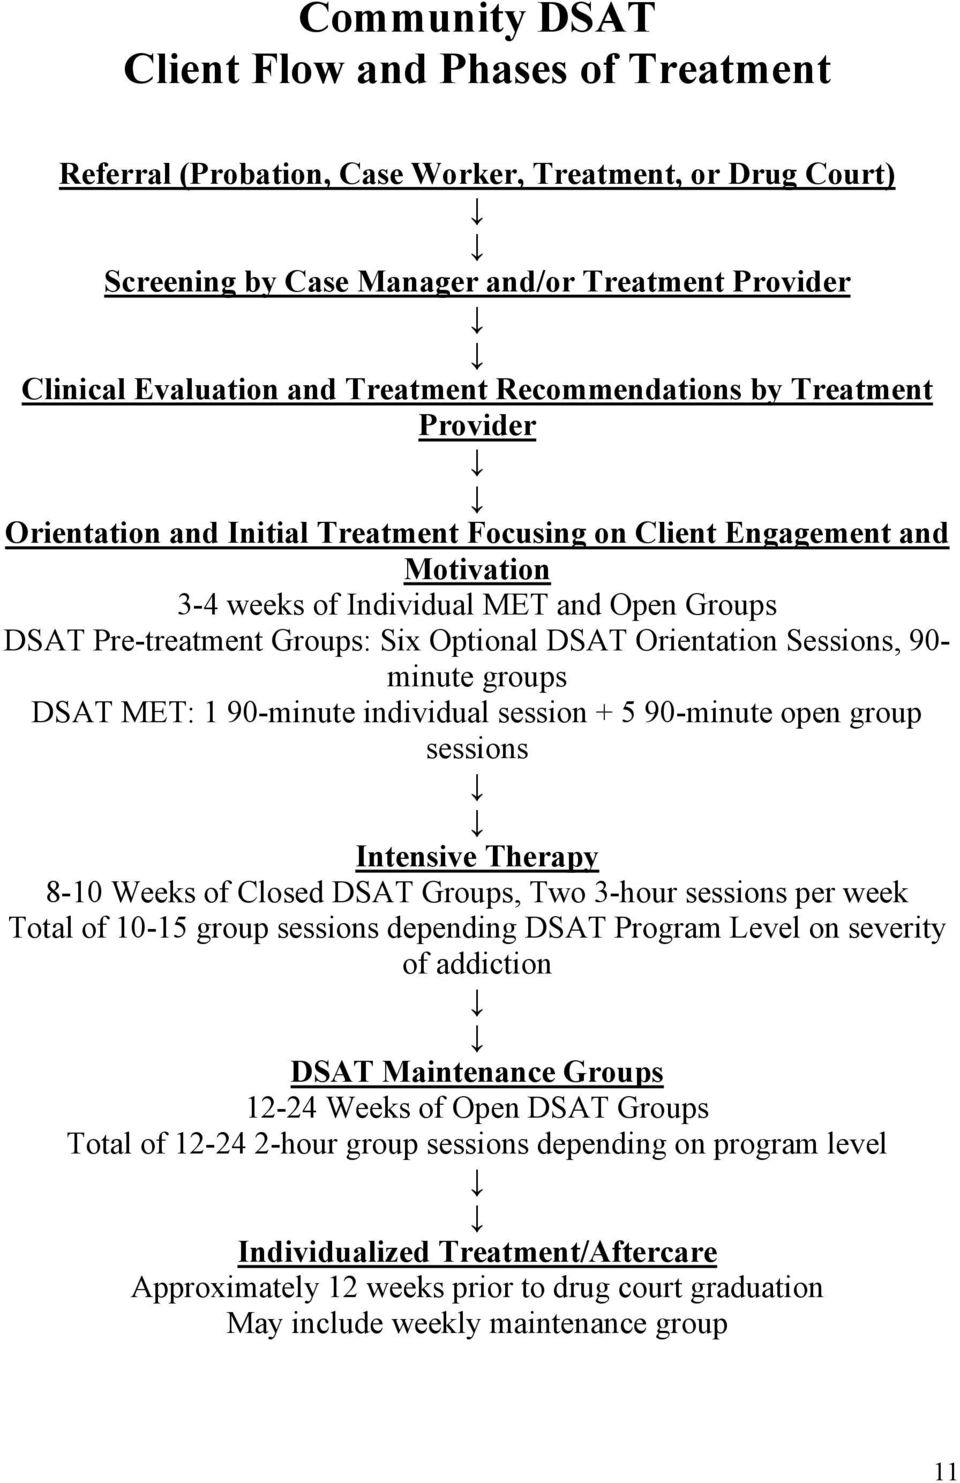 Optional DSAT Orientation Sessions, 90- minute groups DSAT MET: 1 90-minute individual session + 5 90-minute open group sessions Intensive Therapy 8-10 Weeks of Closed DSAT Groups, Two 3-hour